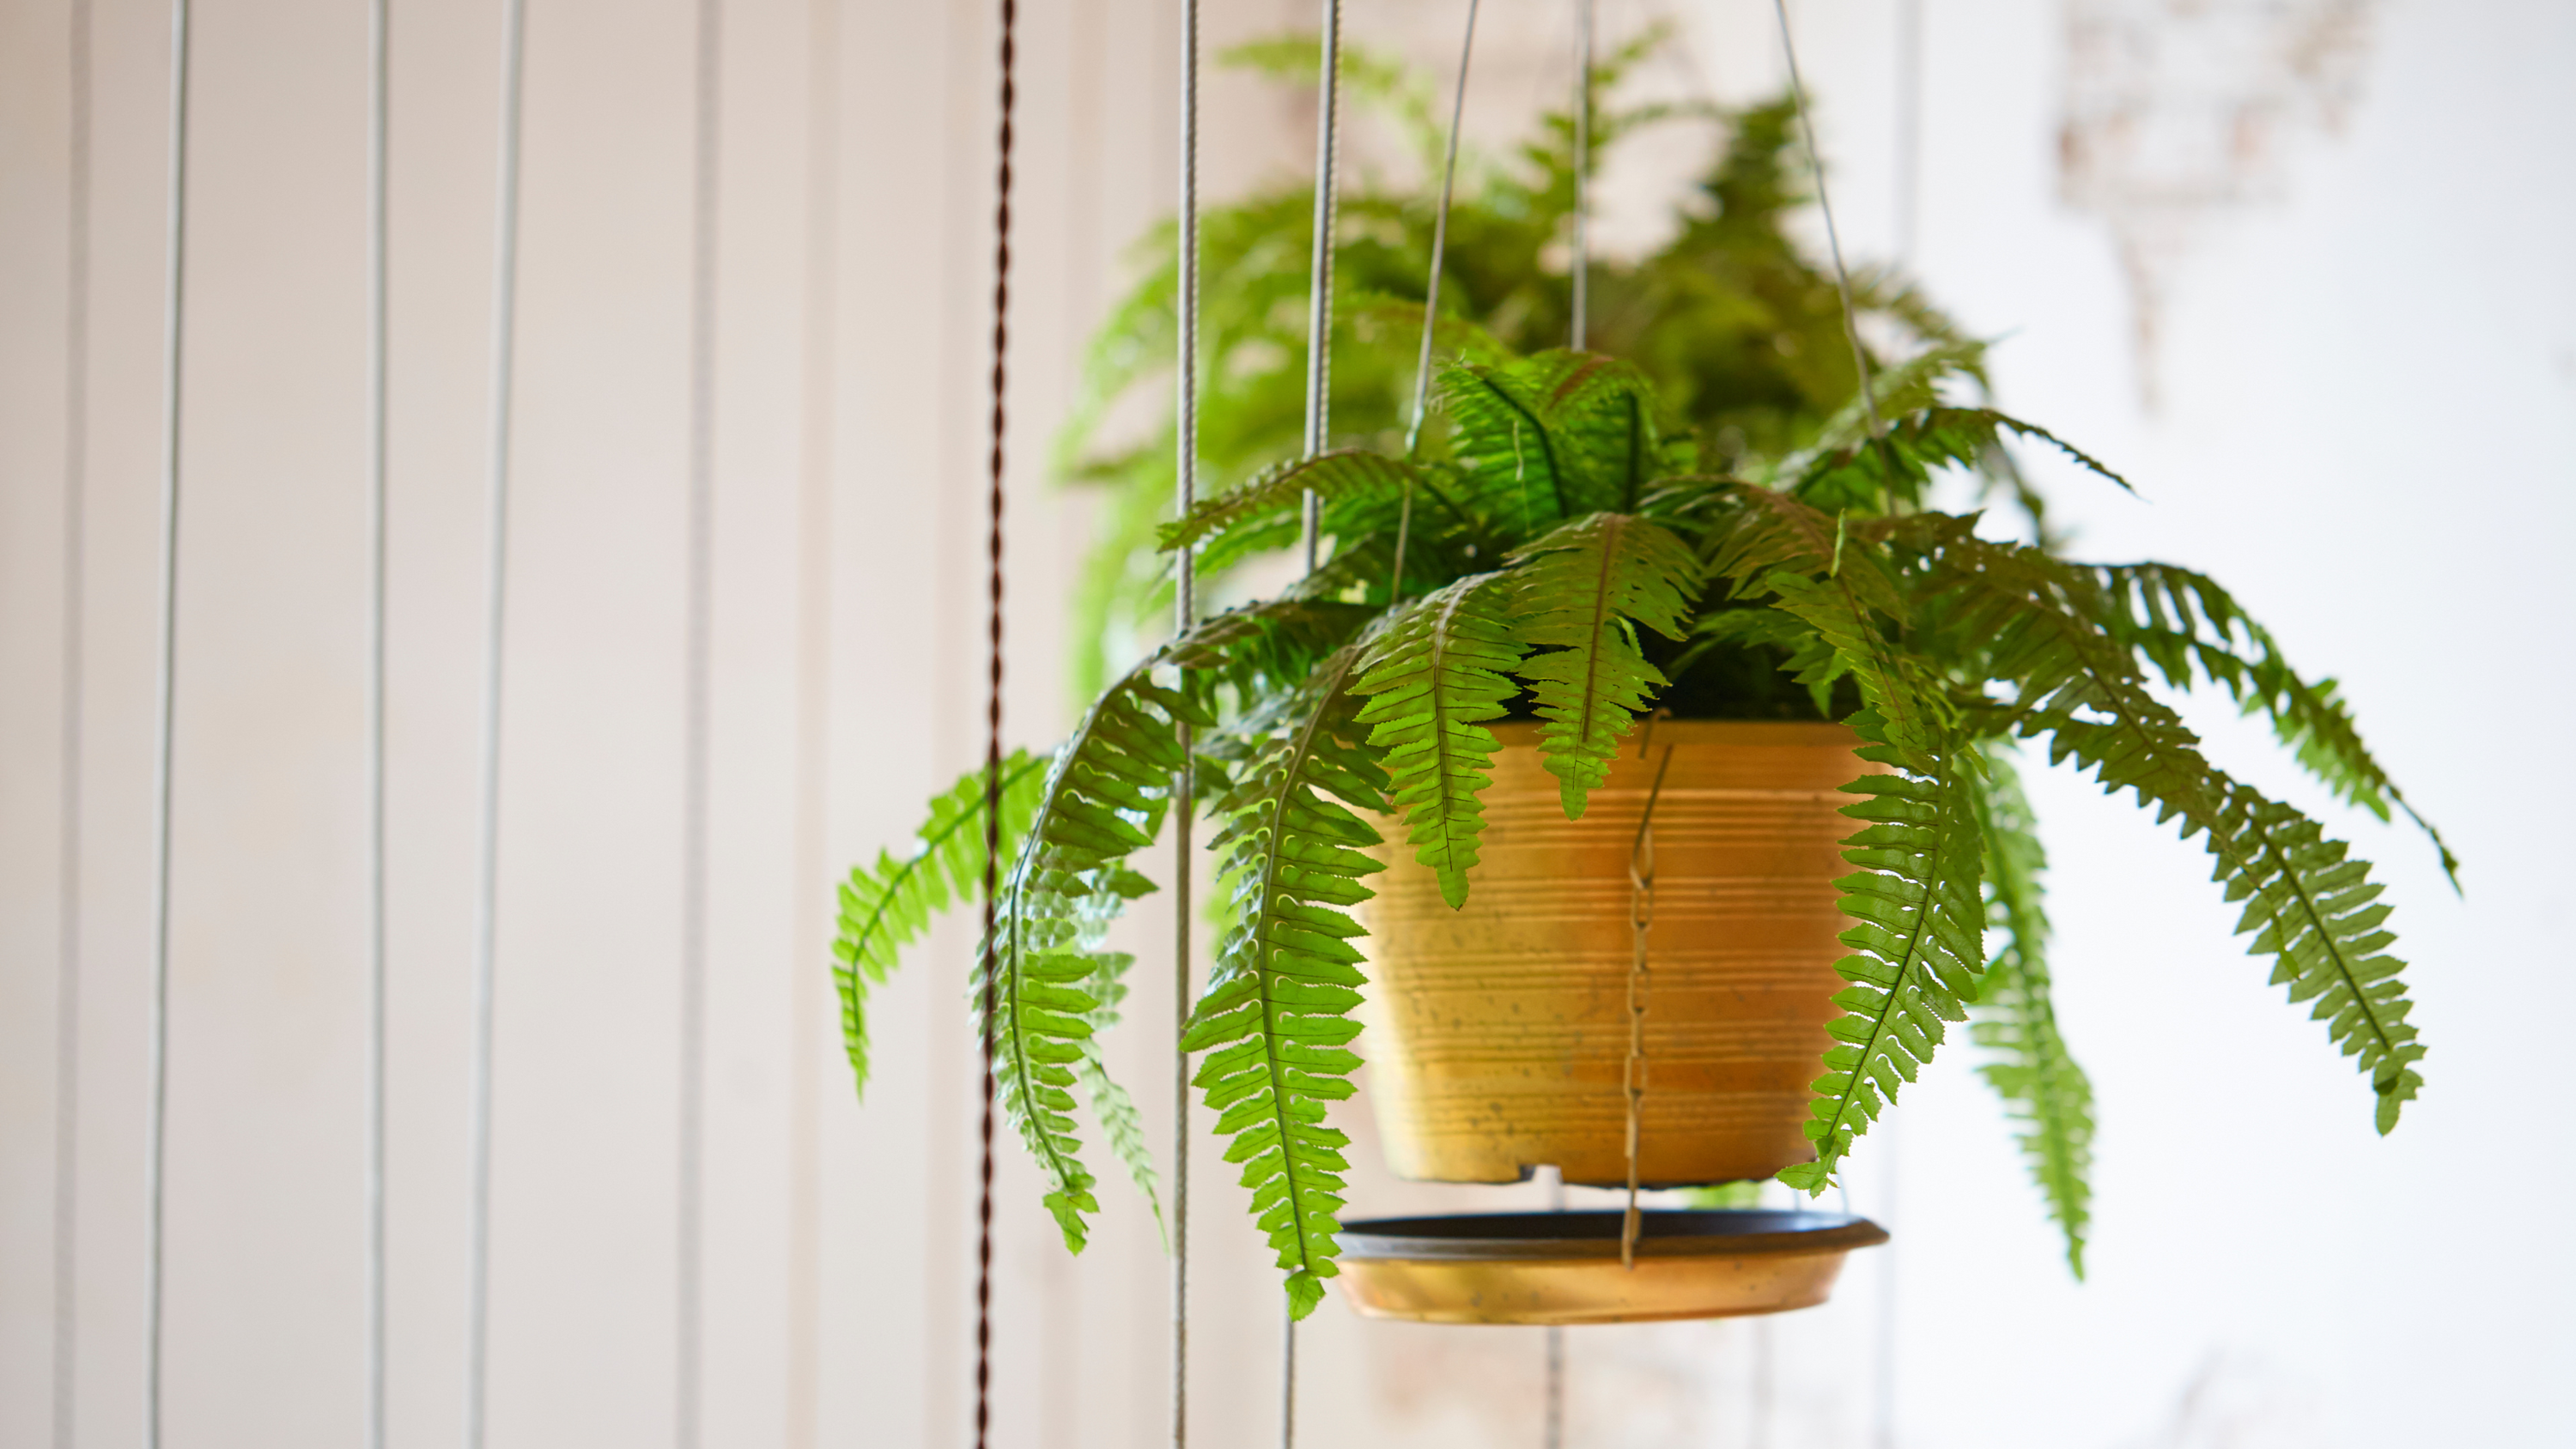 Ideas for Displaying Indoor Ferns in Hanging Planters: Fern-tastic! - Leaf Culture